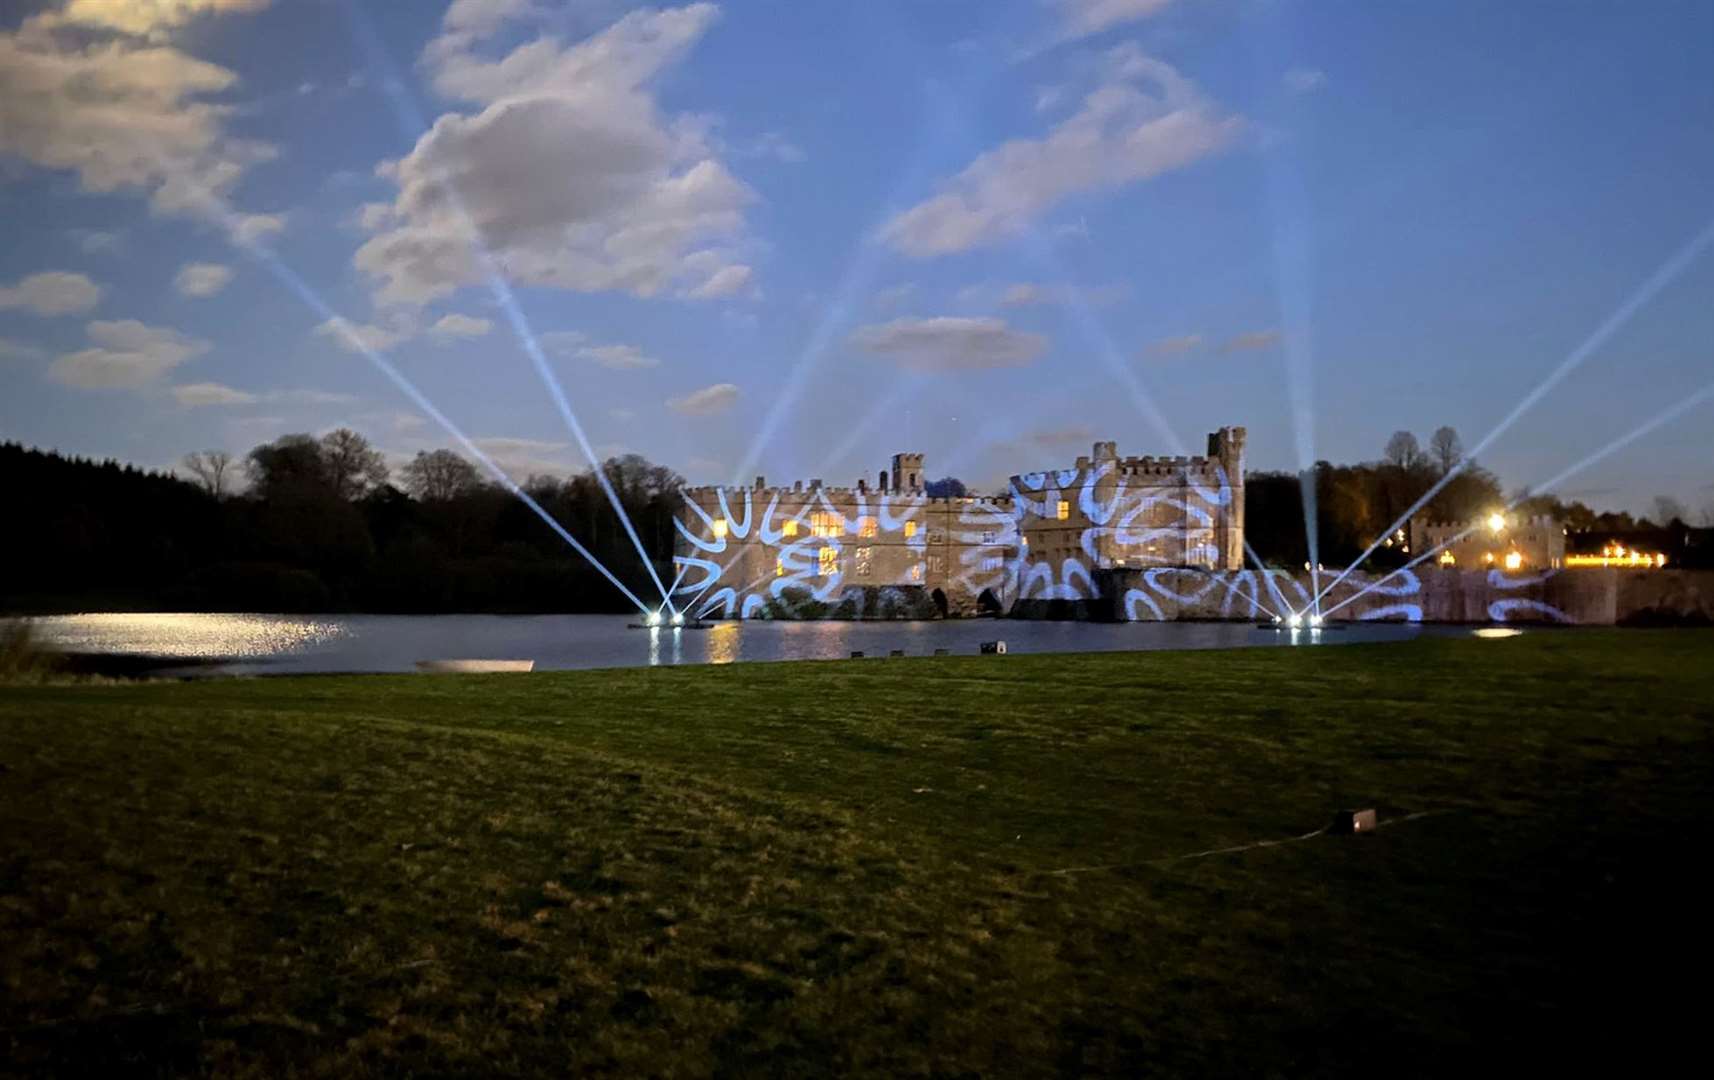 The castle was illuminated by lasers and projections and surrounded by music